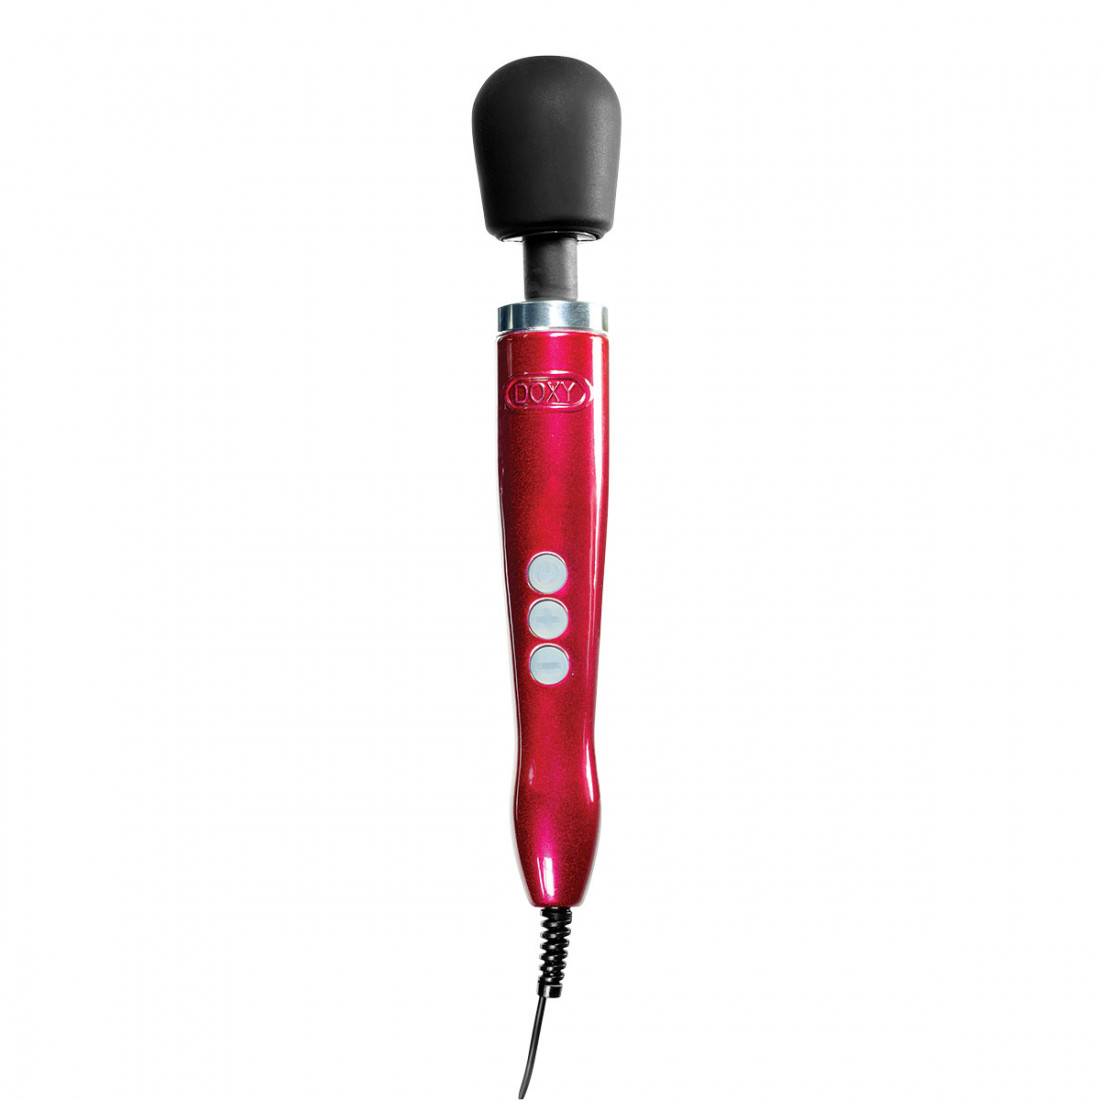 Red doxy die cast wand vibrator by itself on a white background